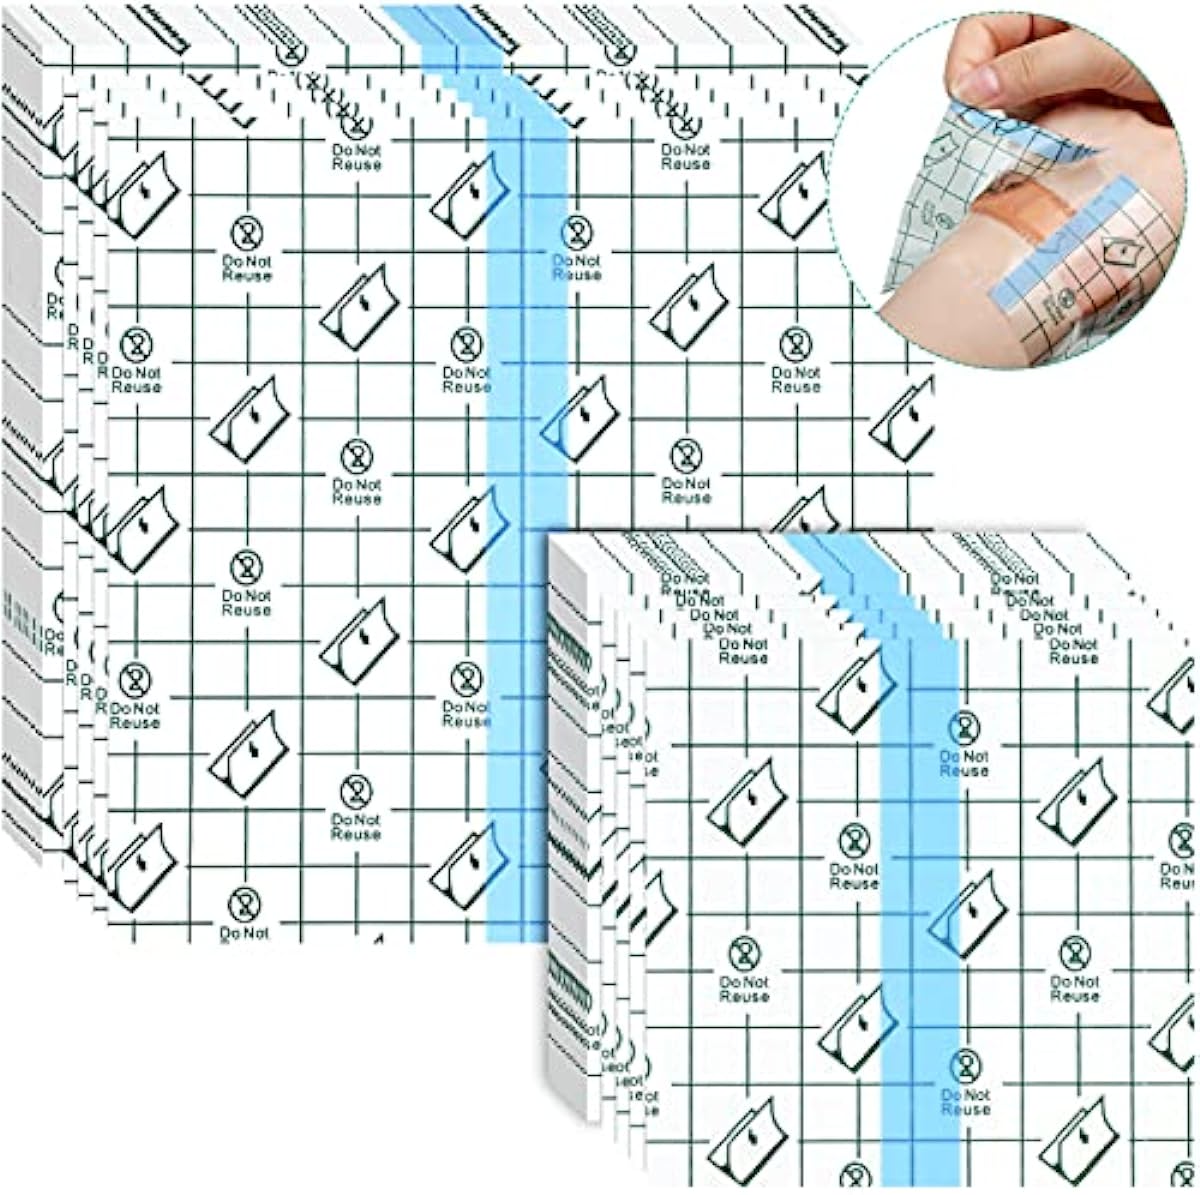 50 Pieces Shower Waterproof Patch Transparent Stretch Adhesive Bandage Waterproof Clear Adhesive Bandages Tattoo Protective Transparent Film Adhesive Bandages for Tattoos (4 x 4 Inch, 6 x 6 Inch)